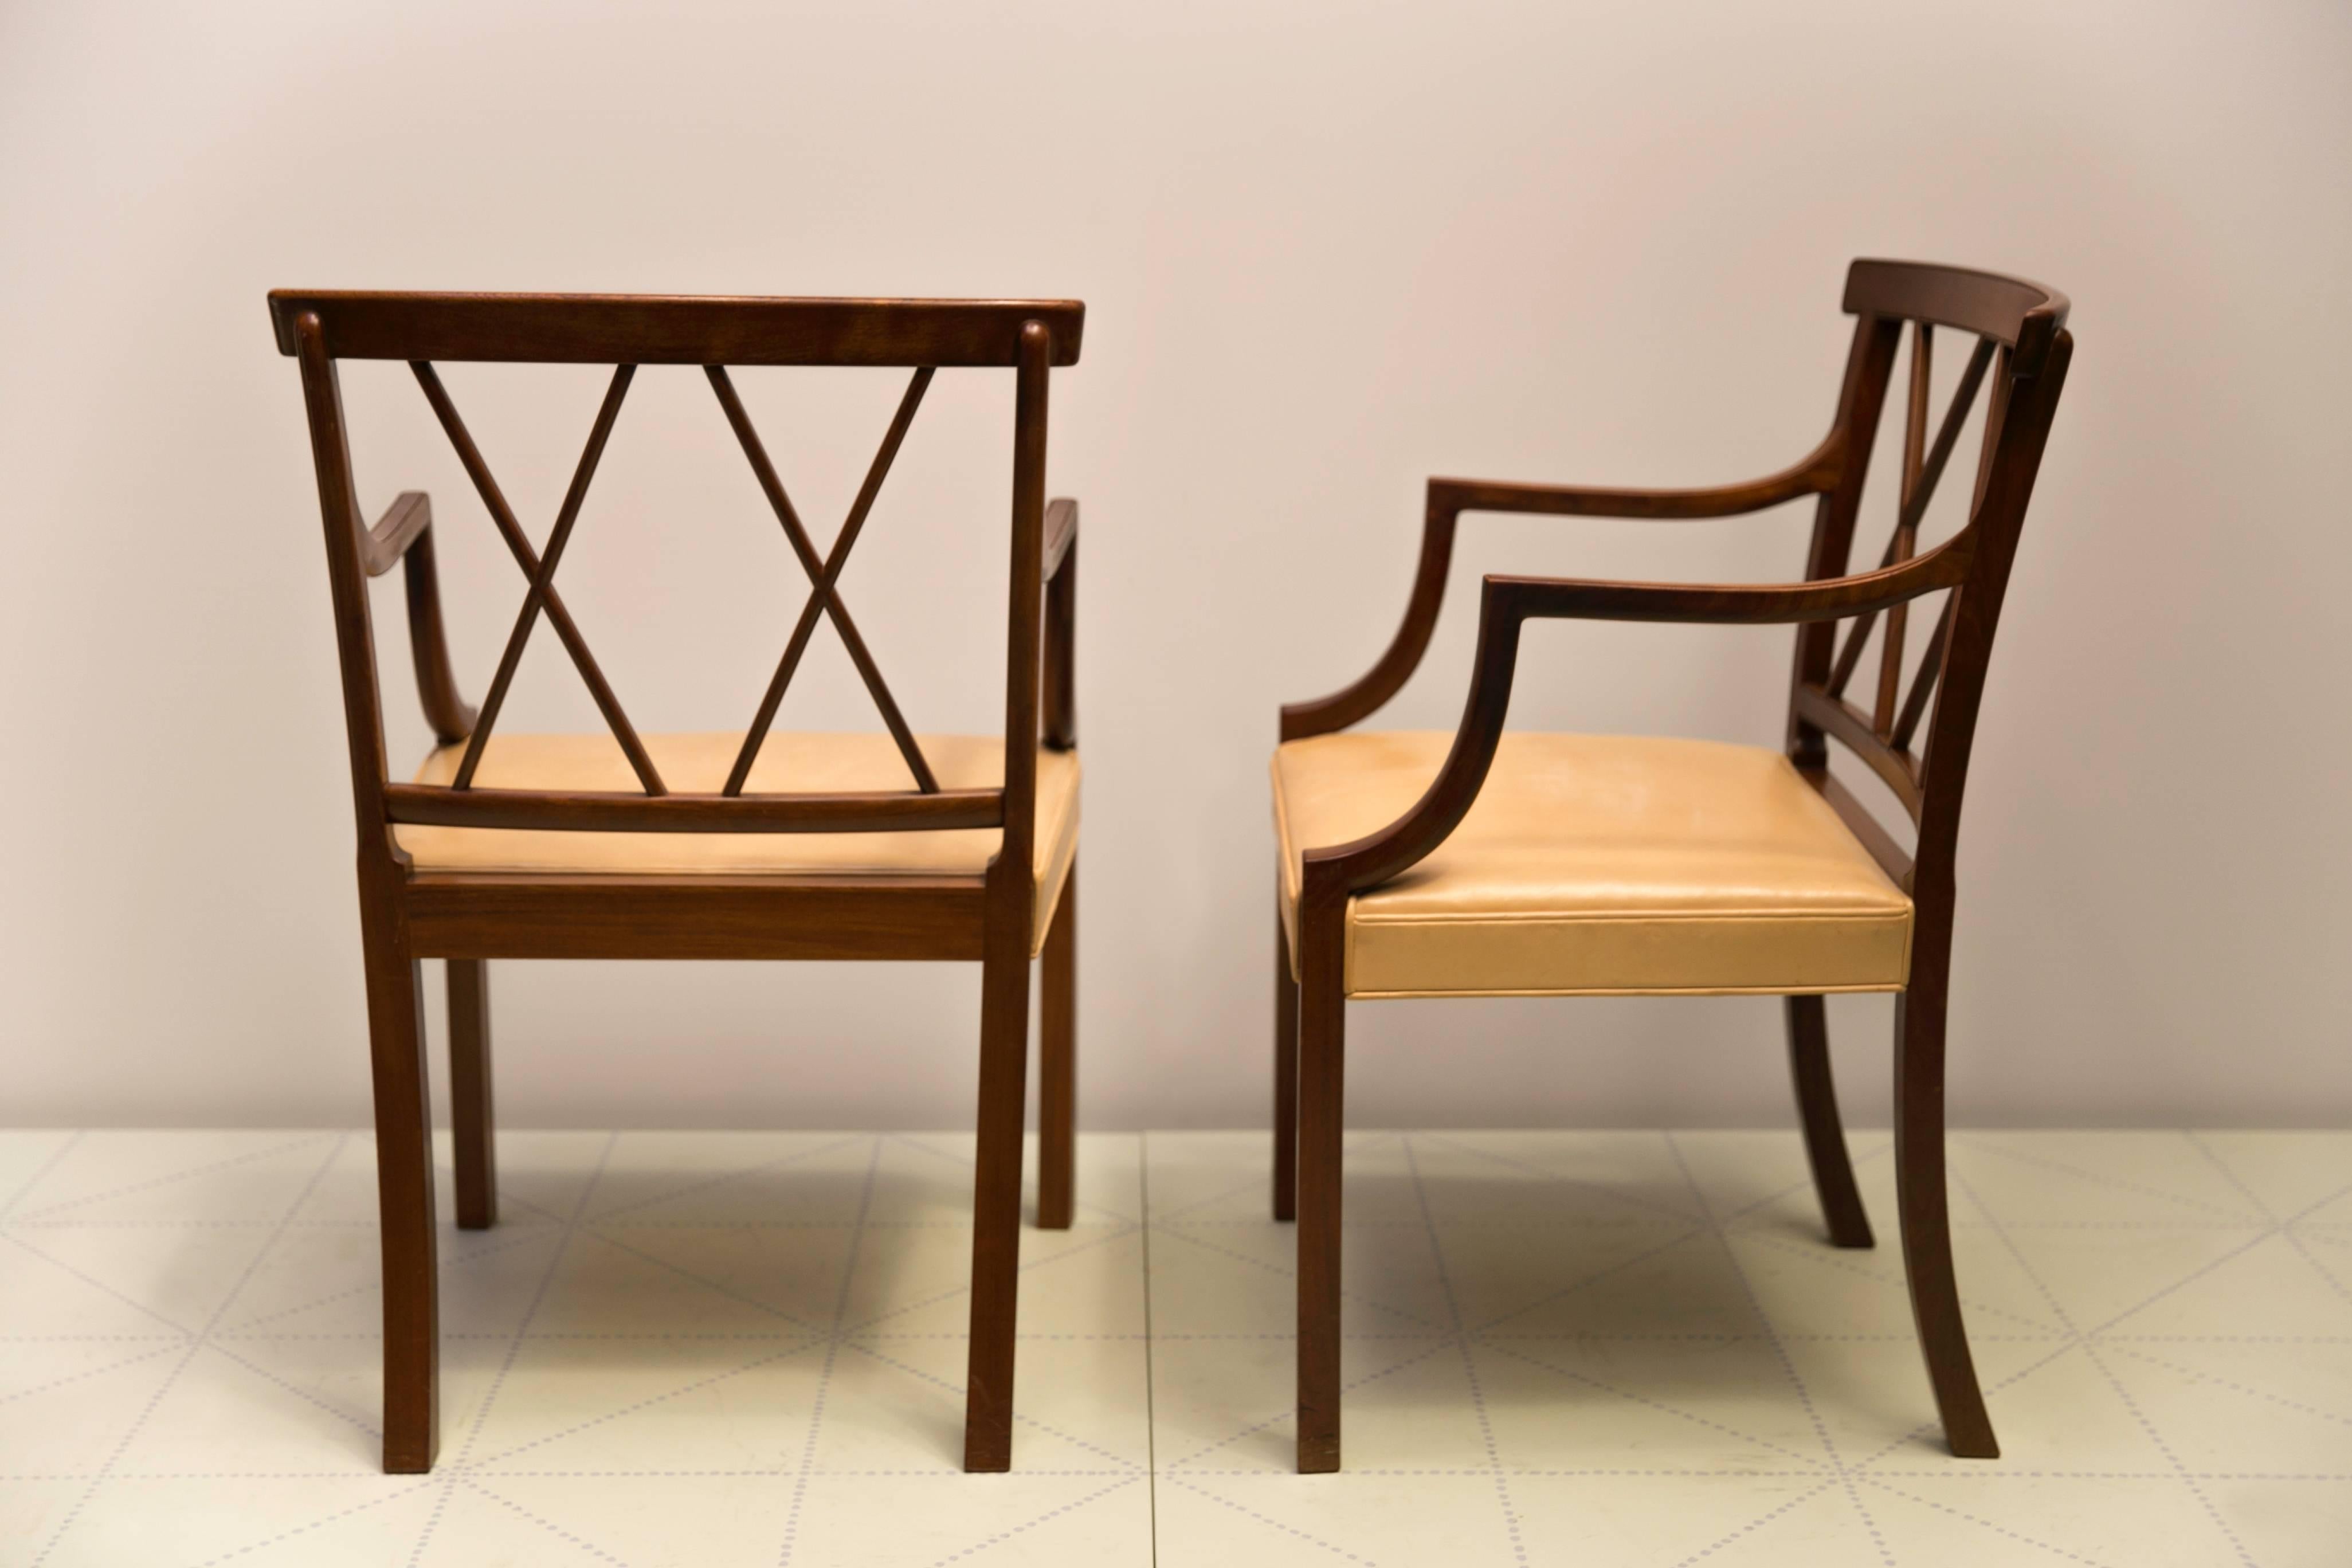 Scandinavian Modern Four Elegant Armchairs by Ole Wanscher, Cuban Mahogany and Original Pale Leather For Sale